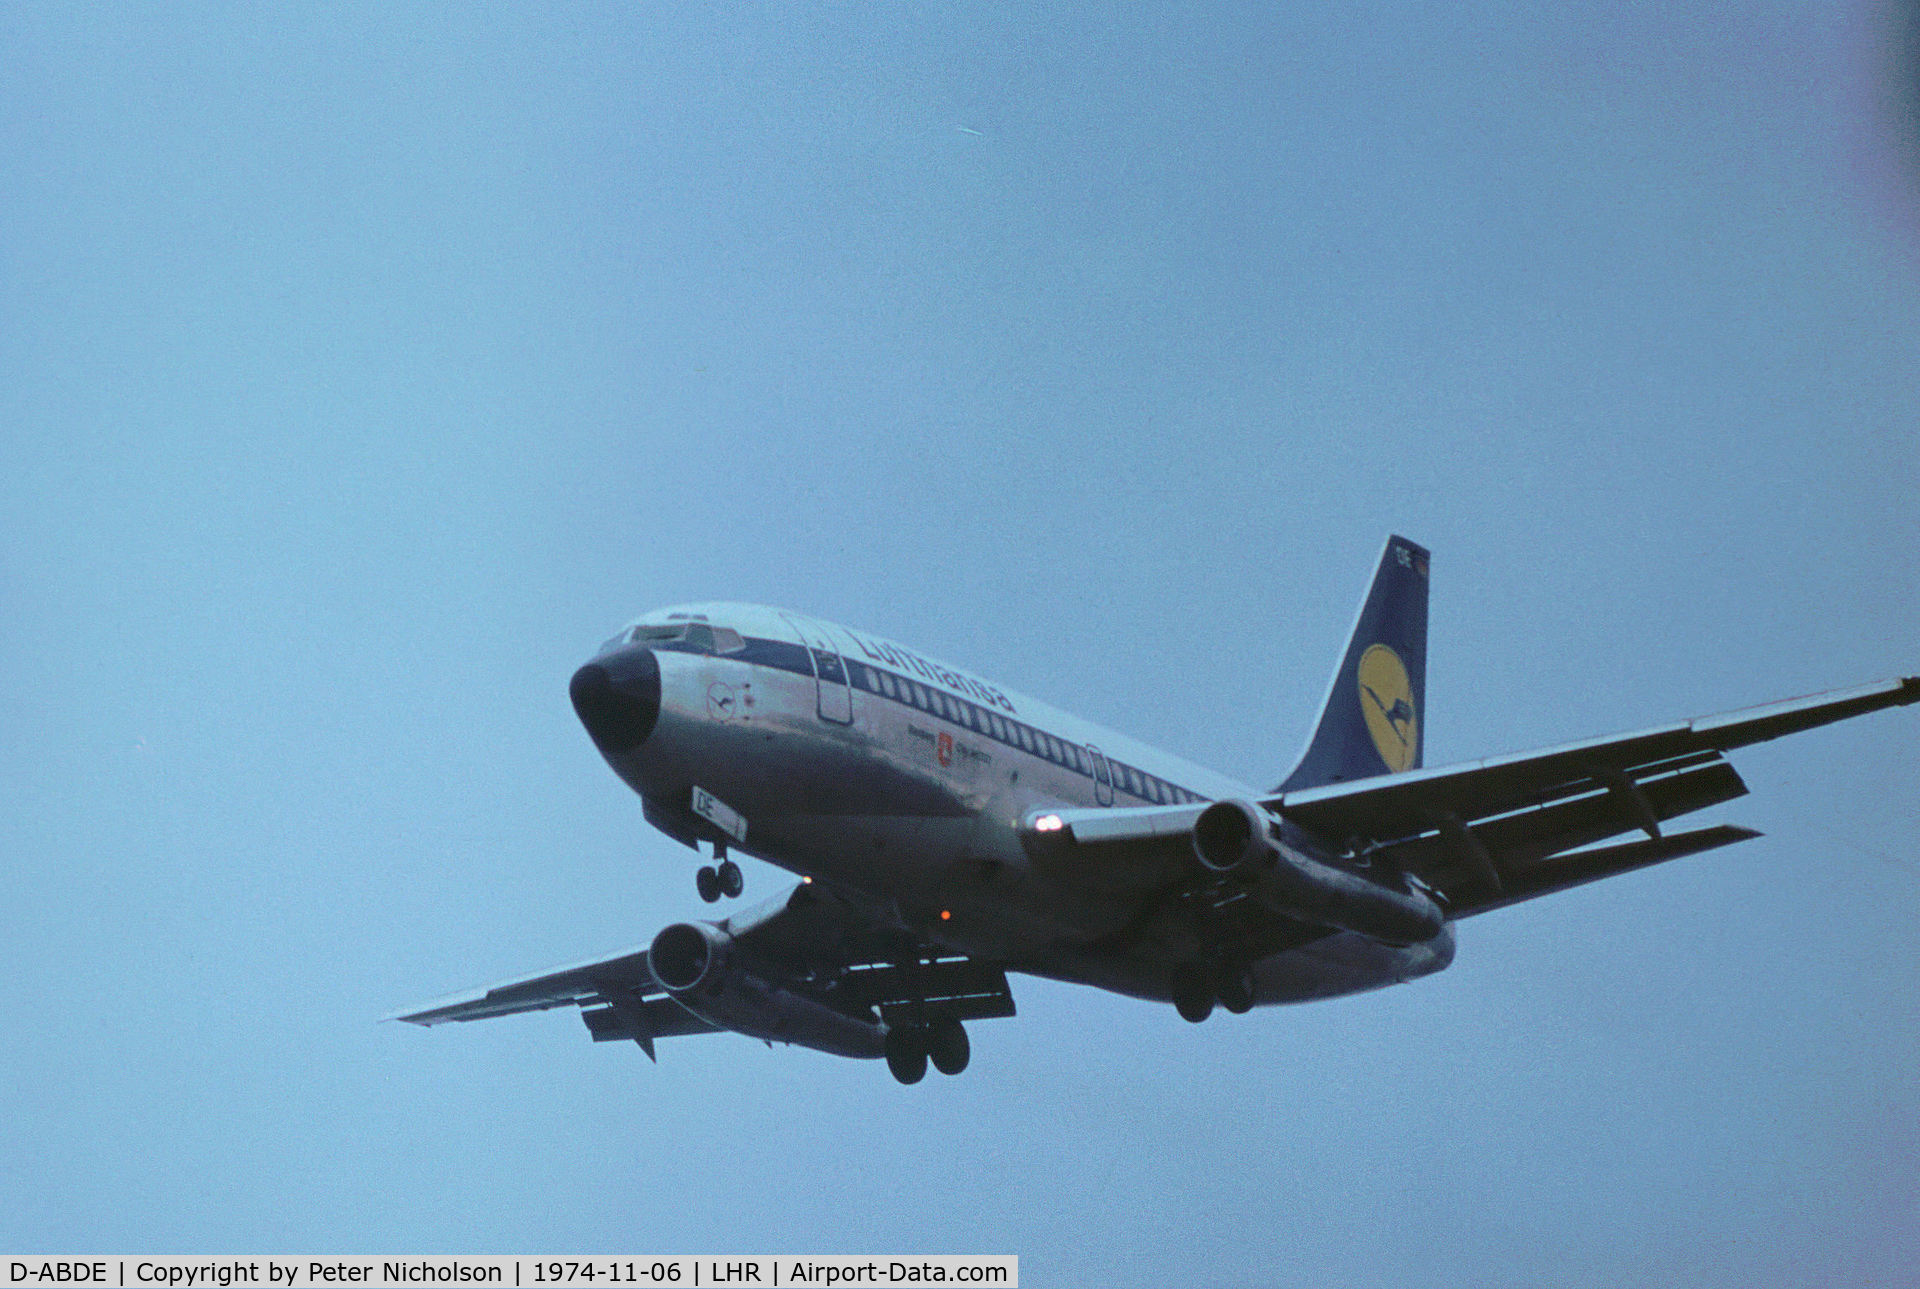 D-ABDE, 1970 Boeing 737-230C C/N 20255, Boeing 727-230C named Bamberg of Lufthansa on final approach to Heathrow in November 1974.